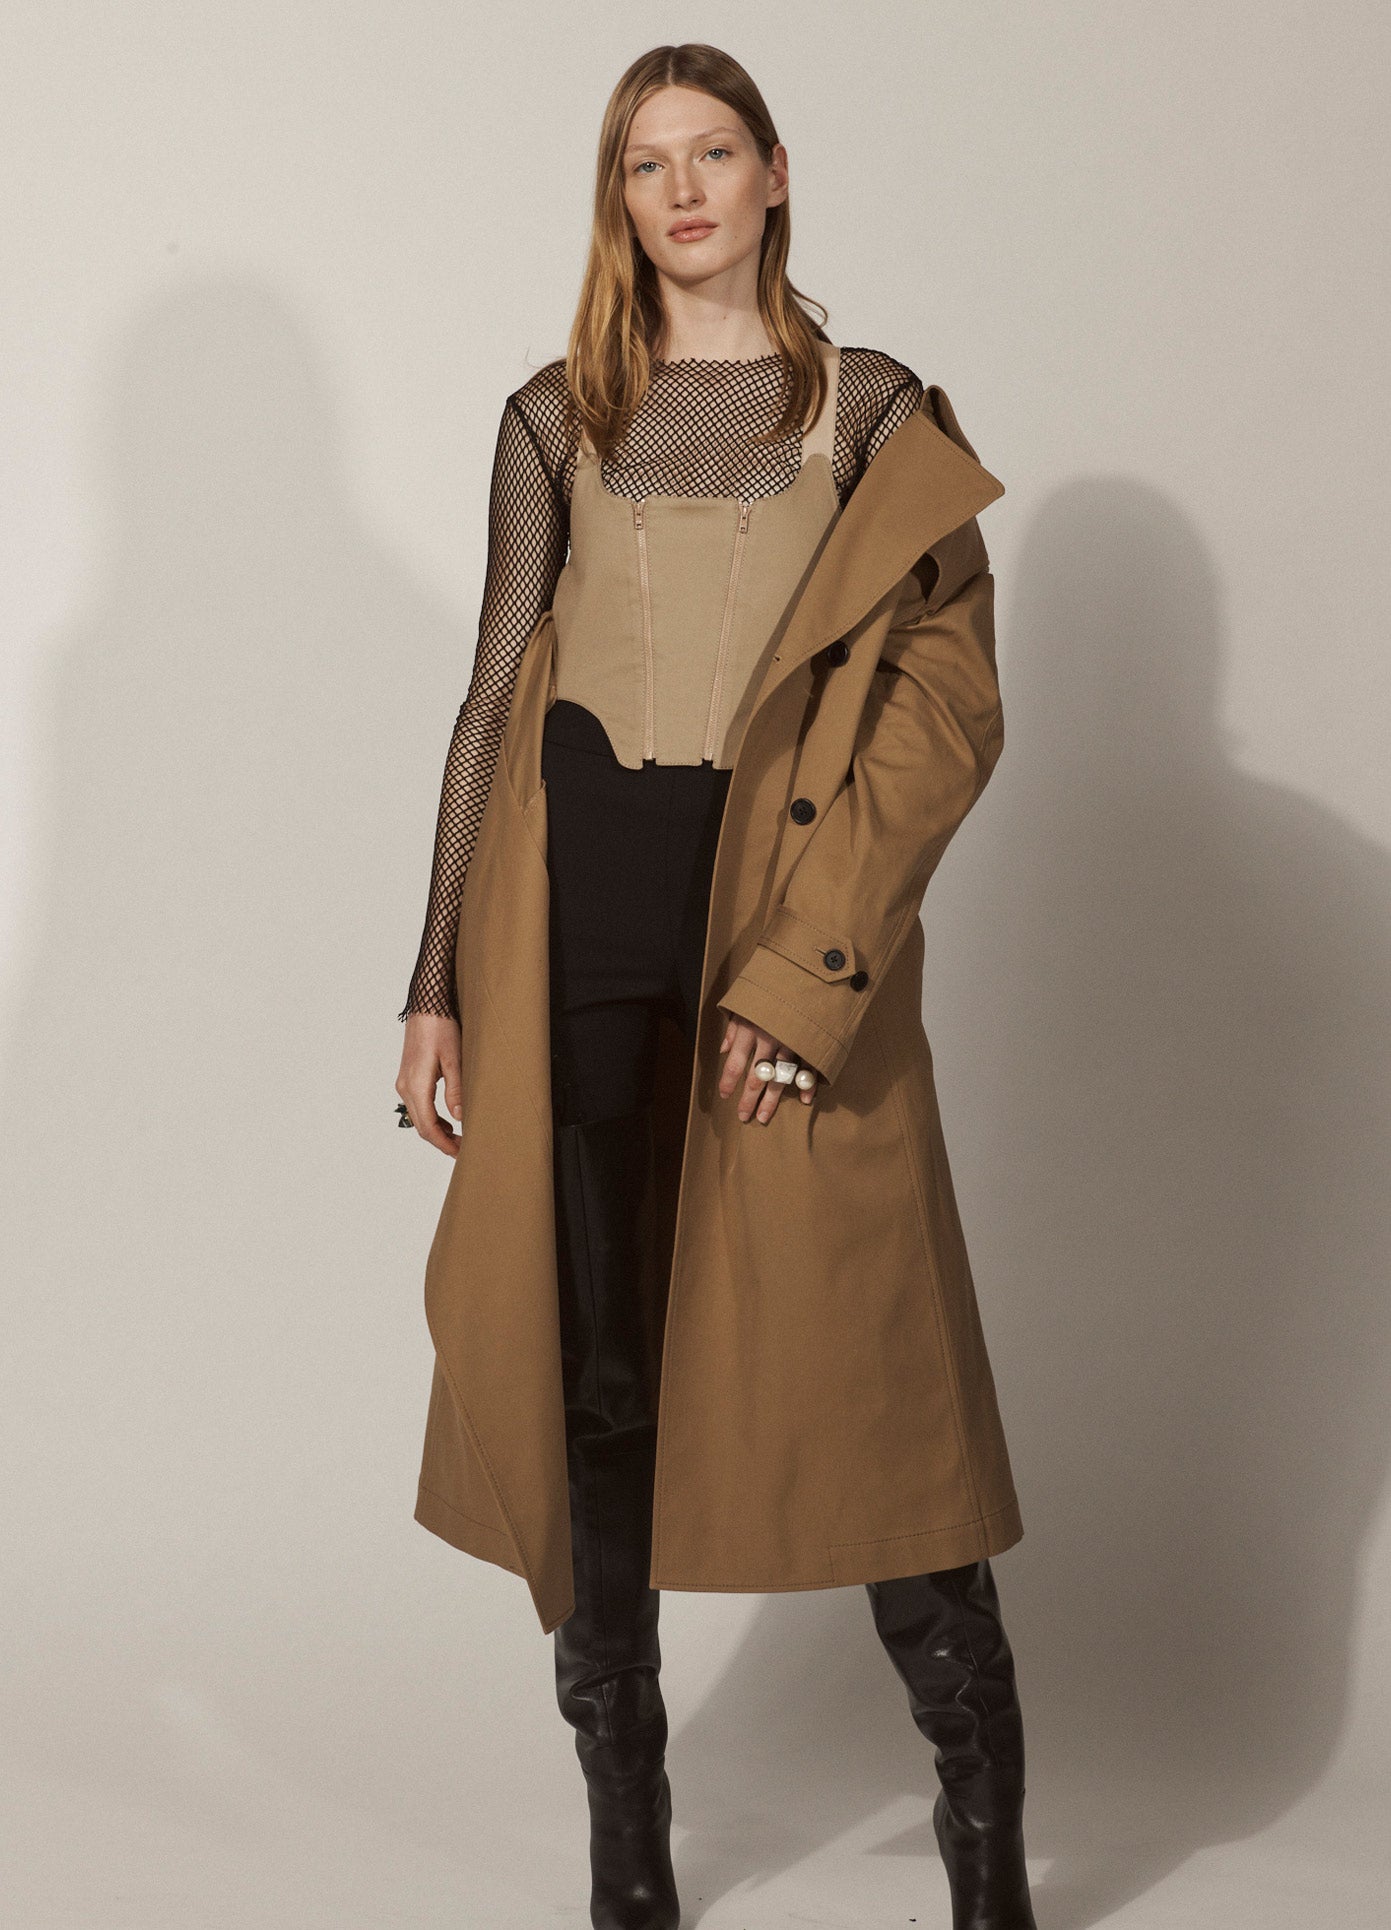 MONSE Bustier Trench Coat in Khaki and Beige on Model Lookbook Front View